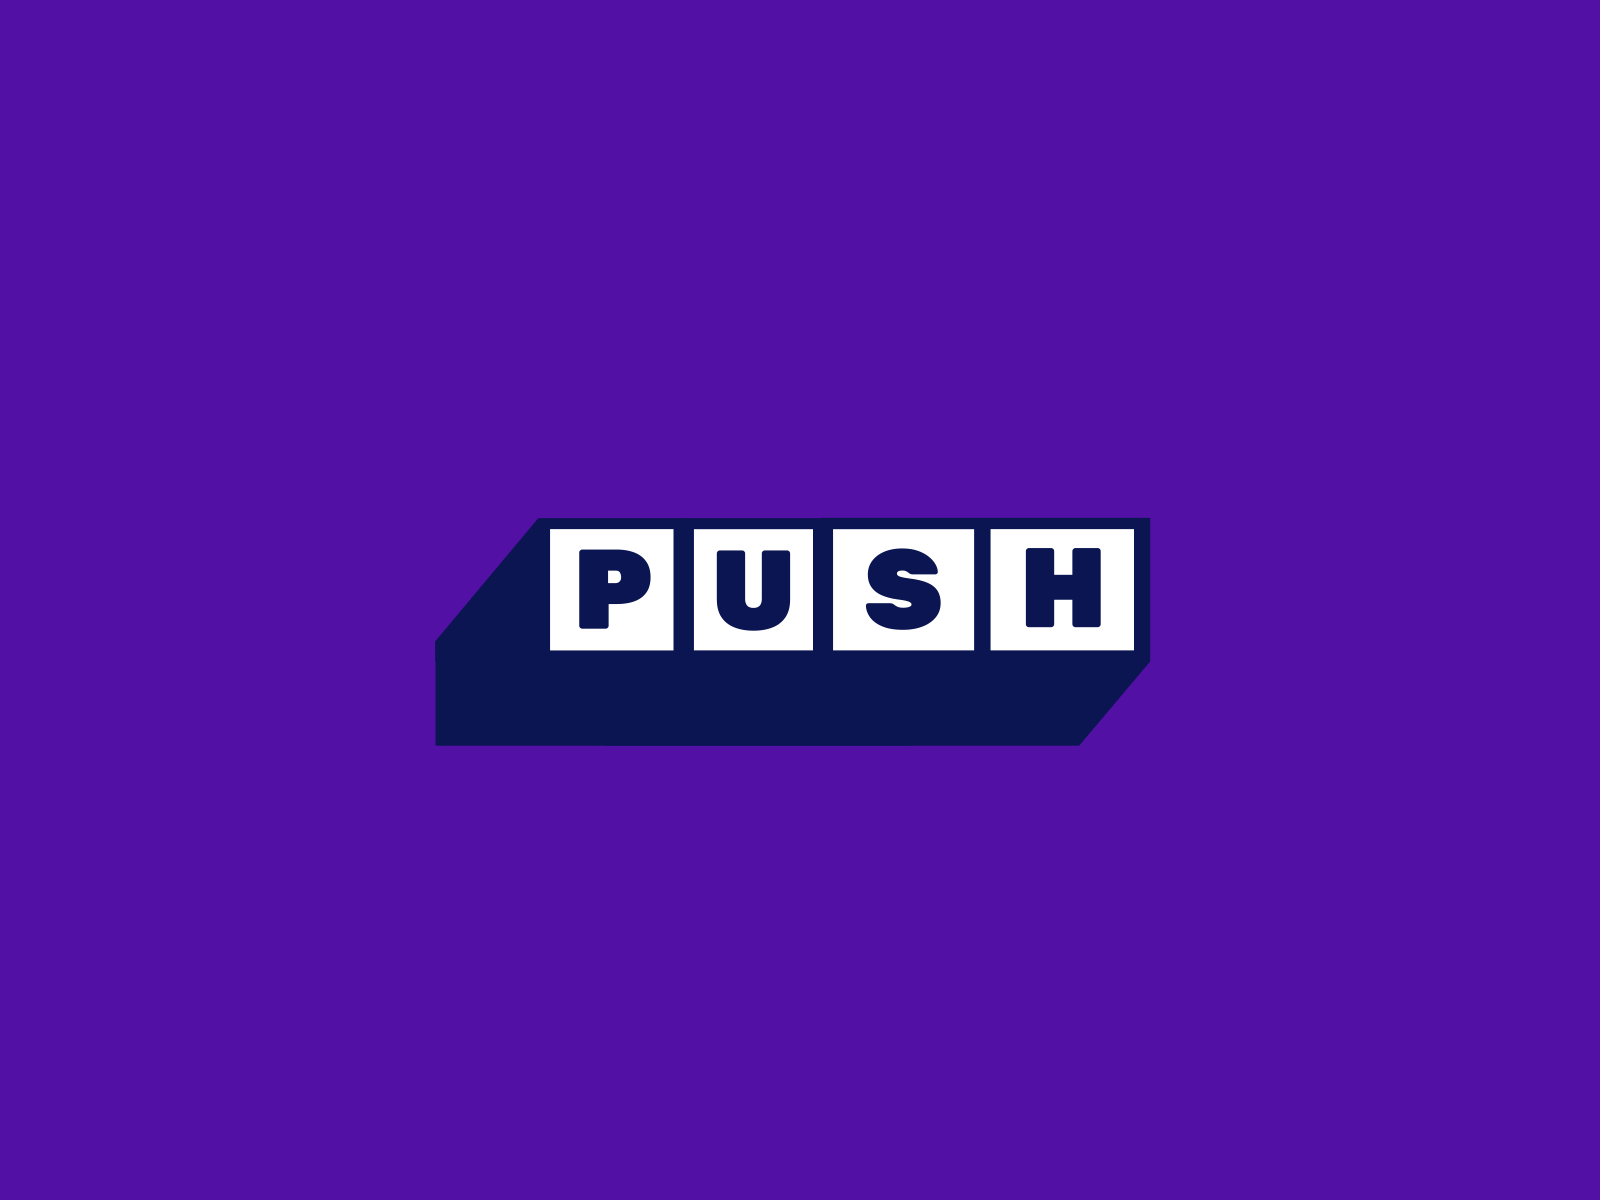 Push the button after effects animation button design gif illustration keyboard letters motion graphics push test vector